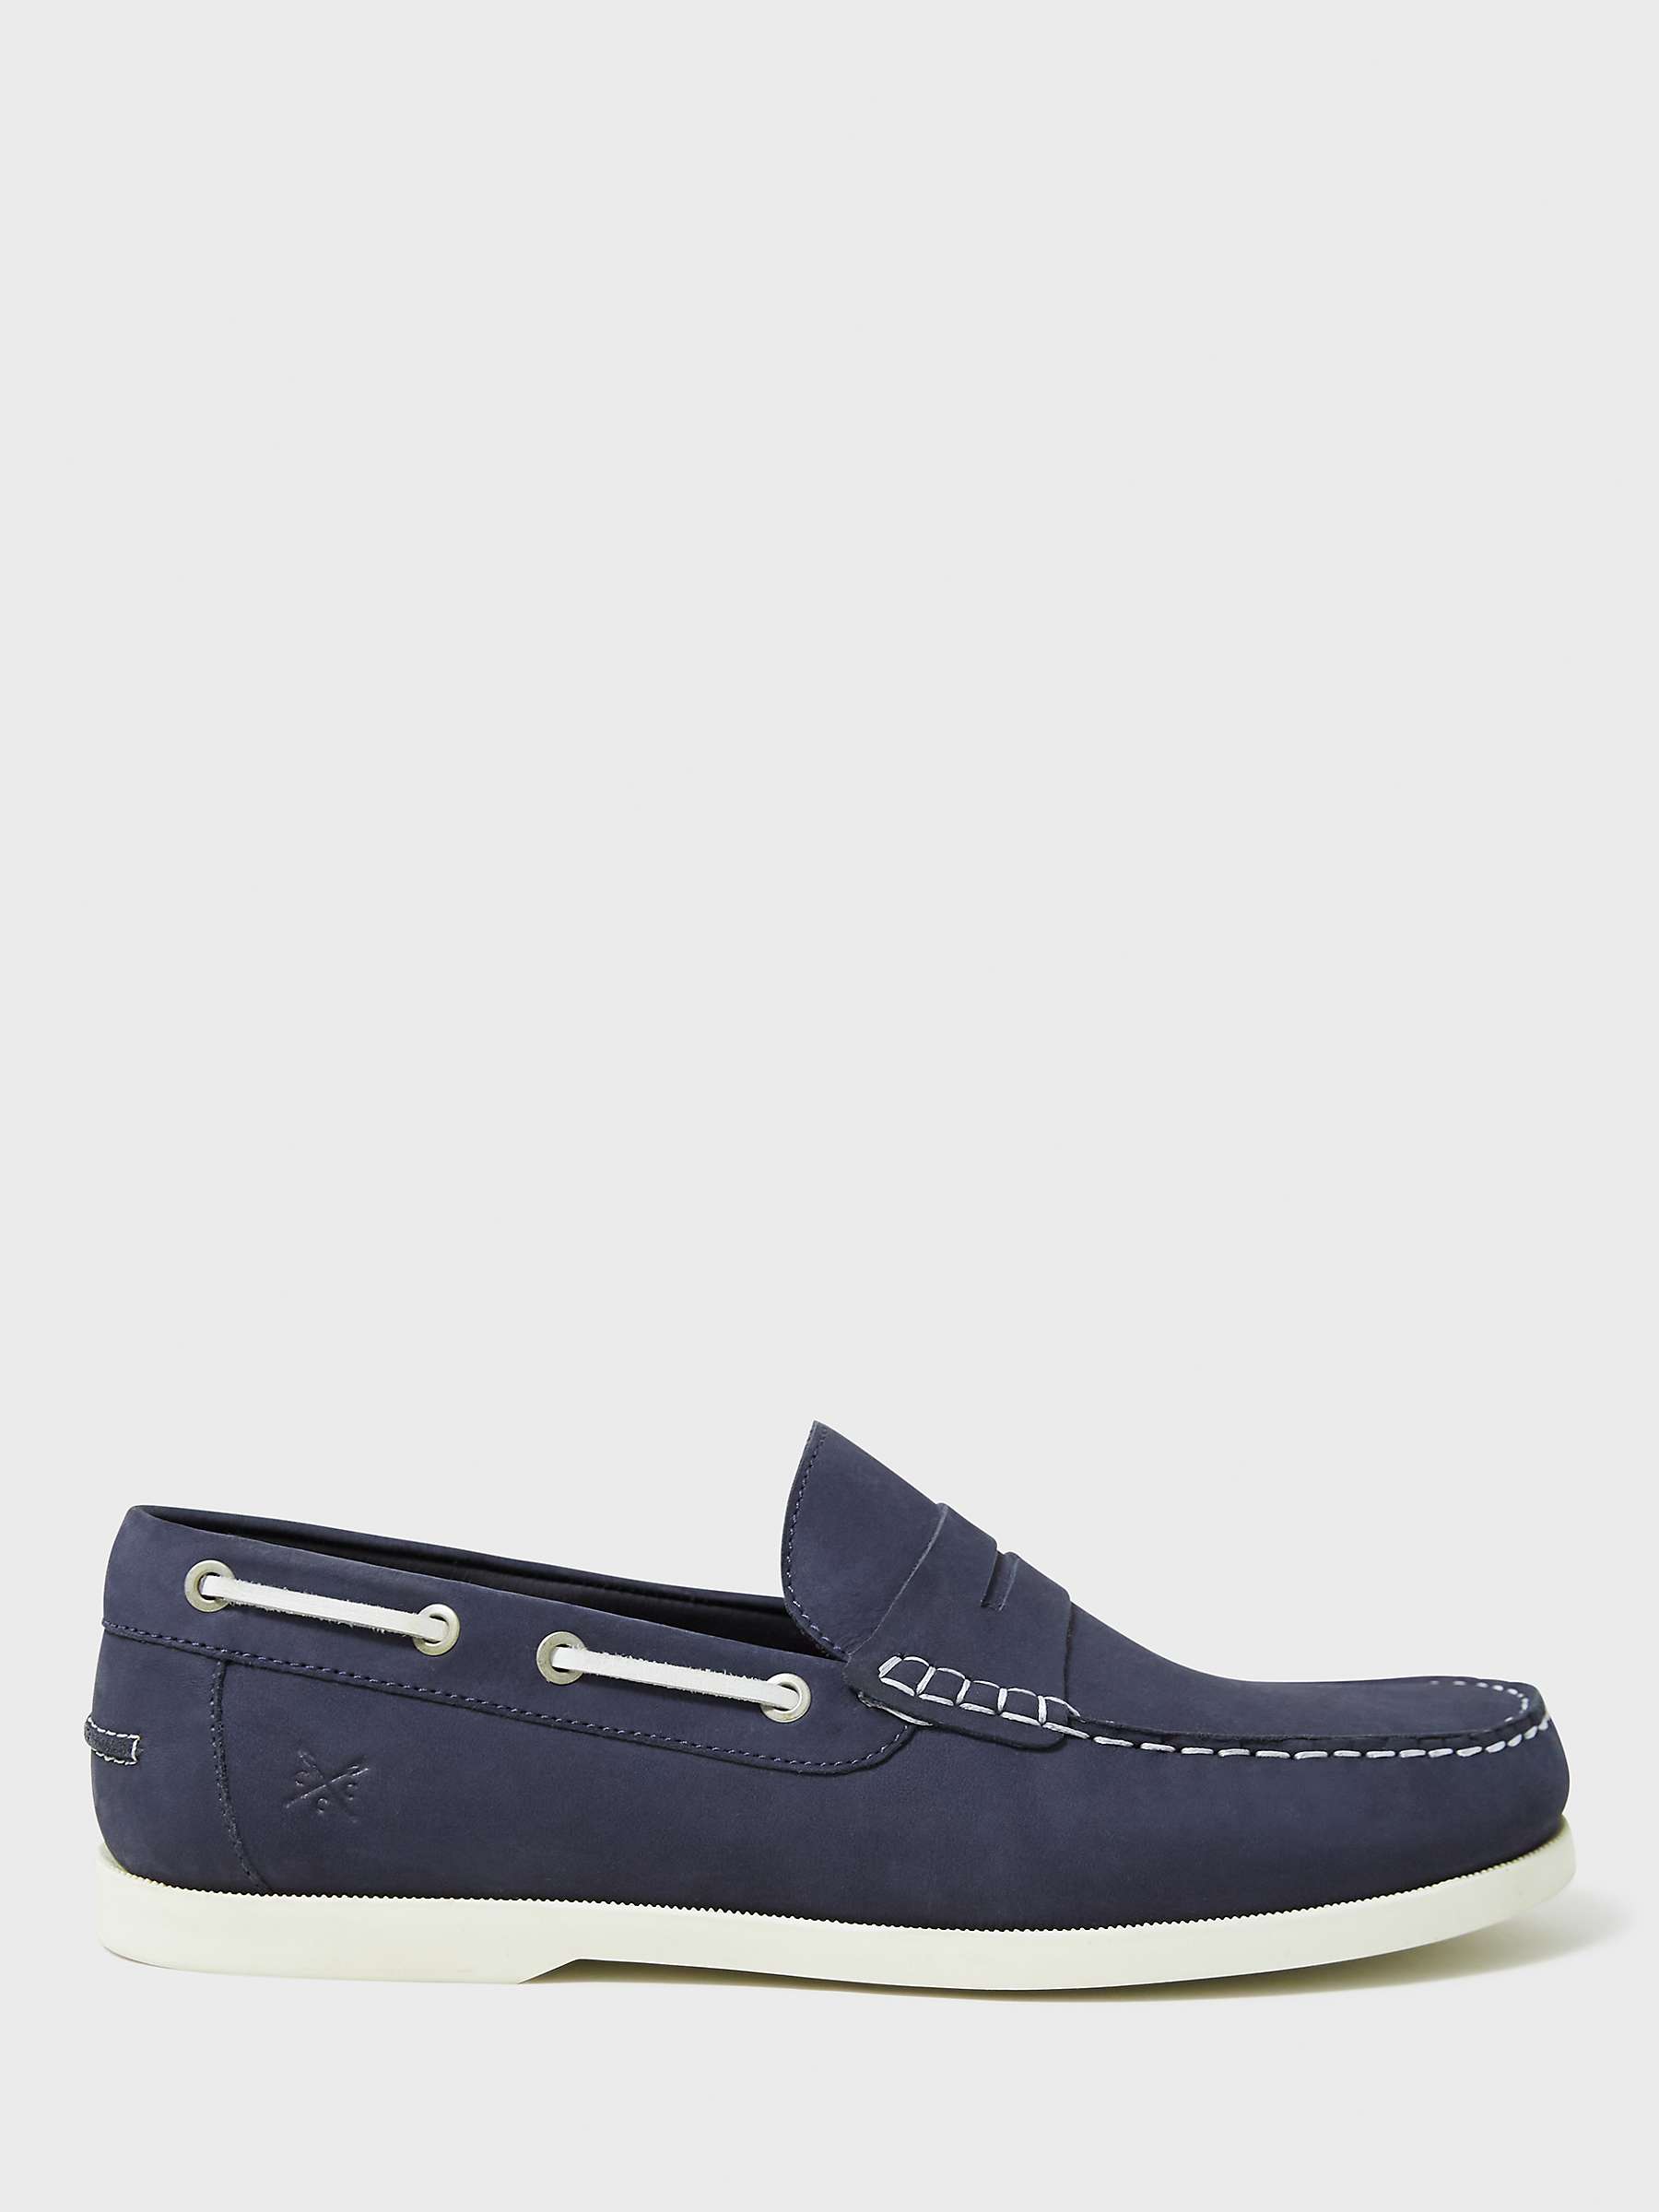 Buy Crew Clothing Slip On Classic Deck Shoes, Navy Blue Online at johnlewis.com